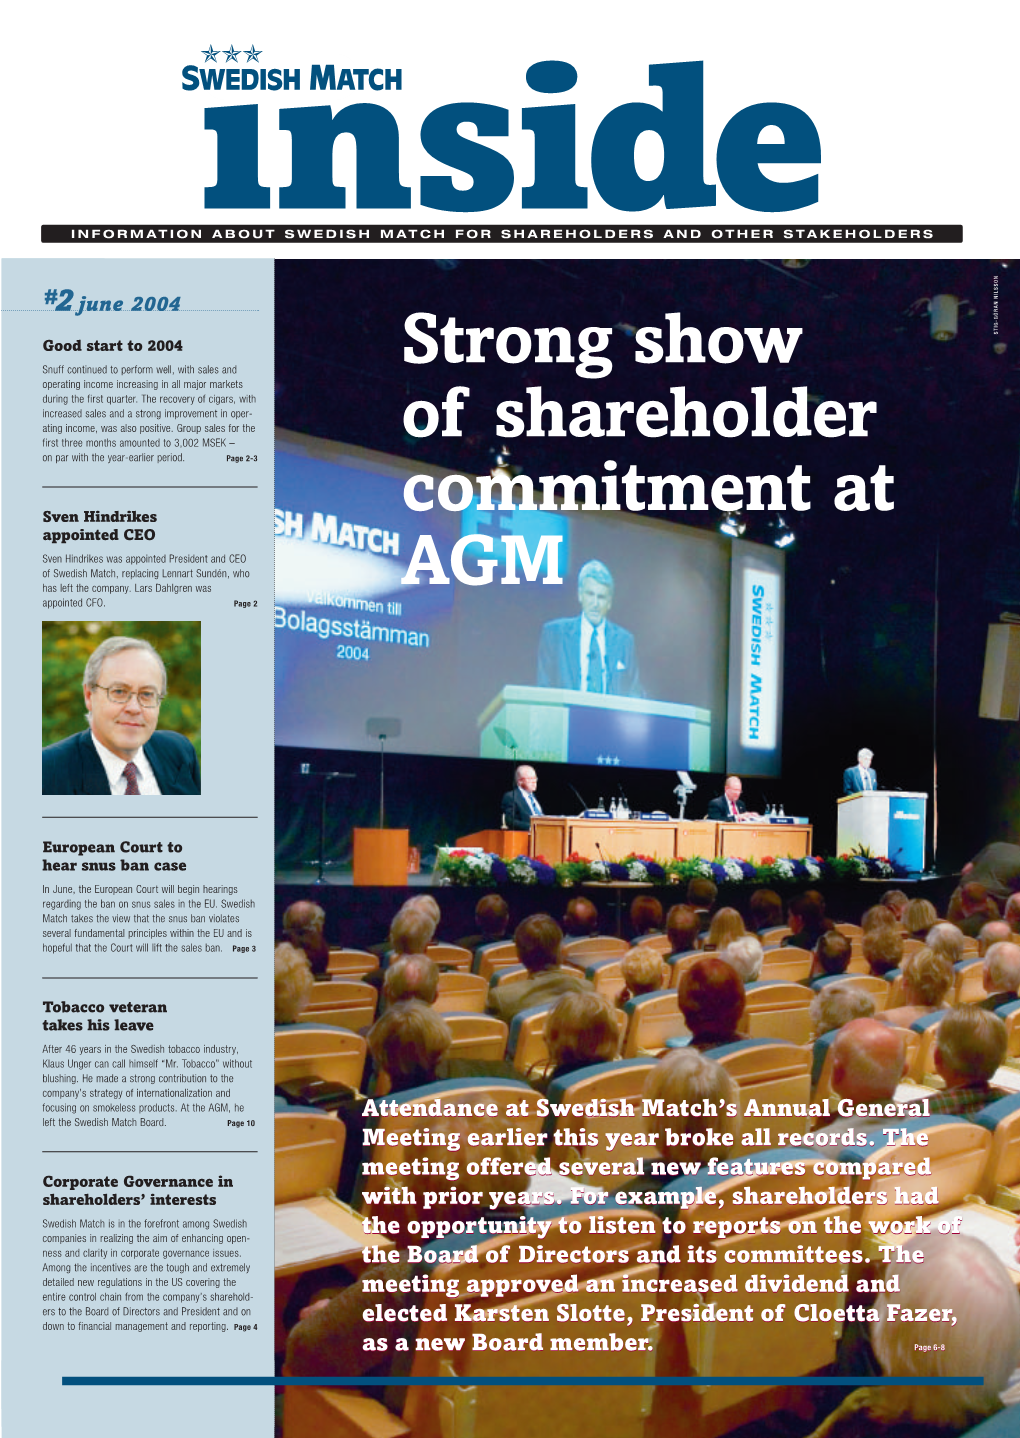 Strong Show of Shareholder Commitment At